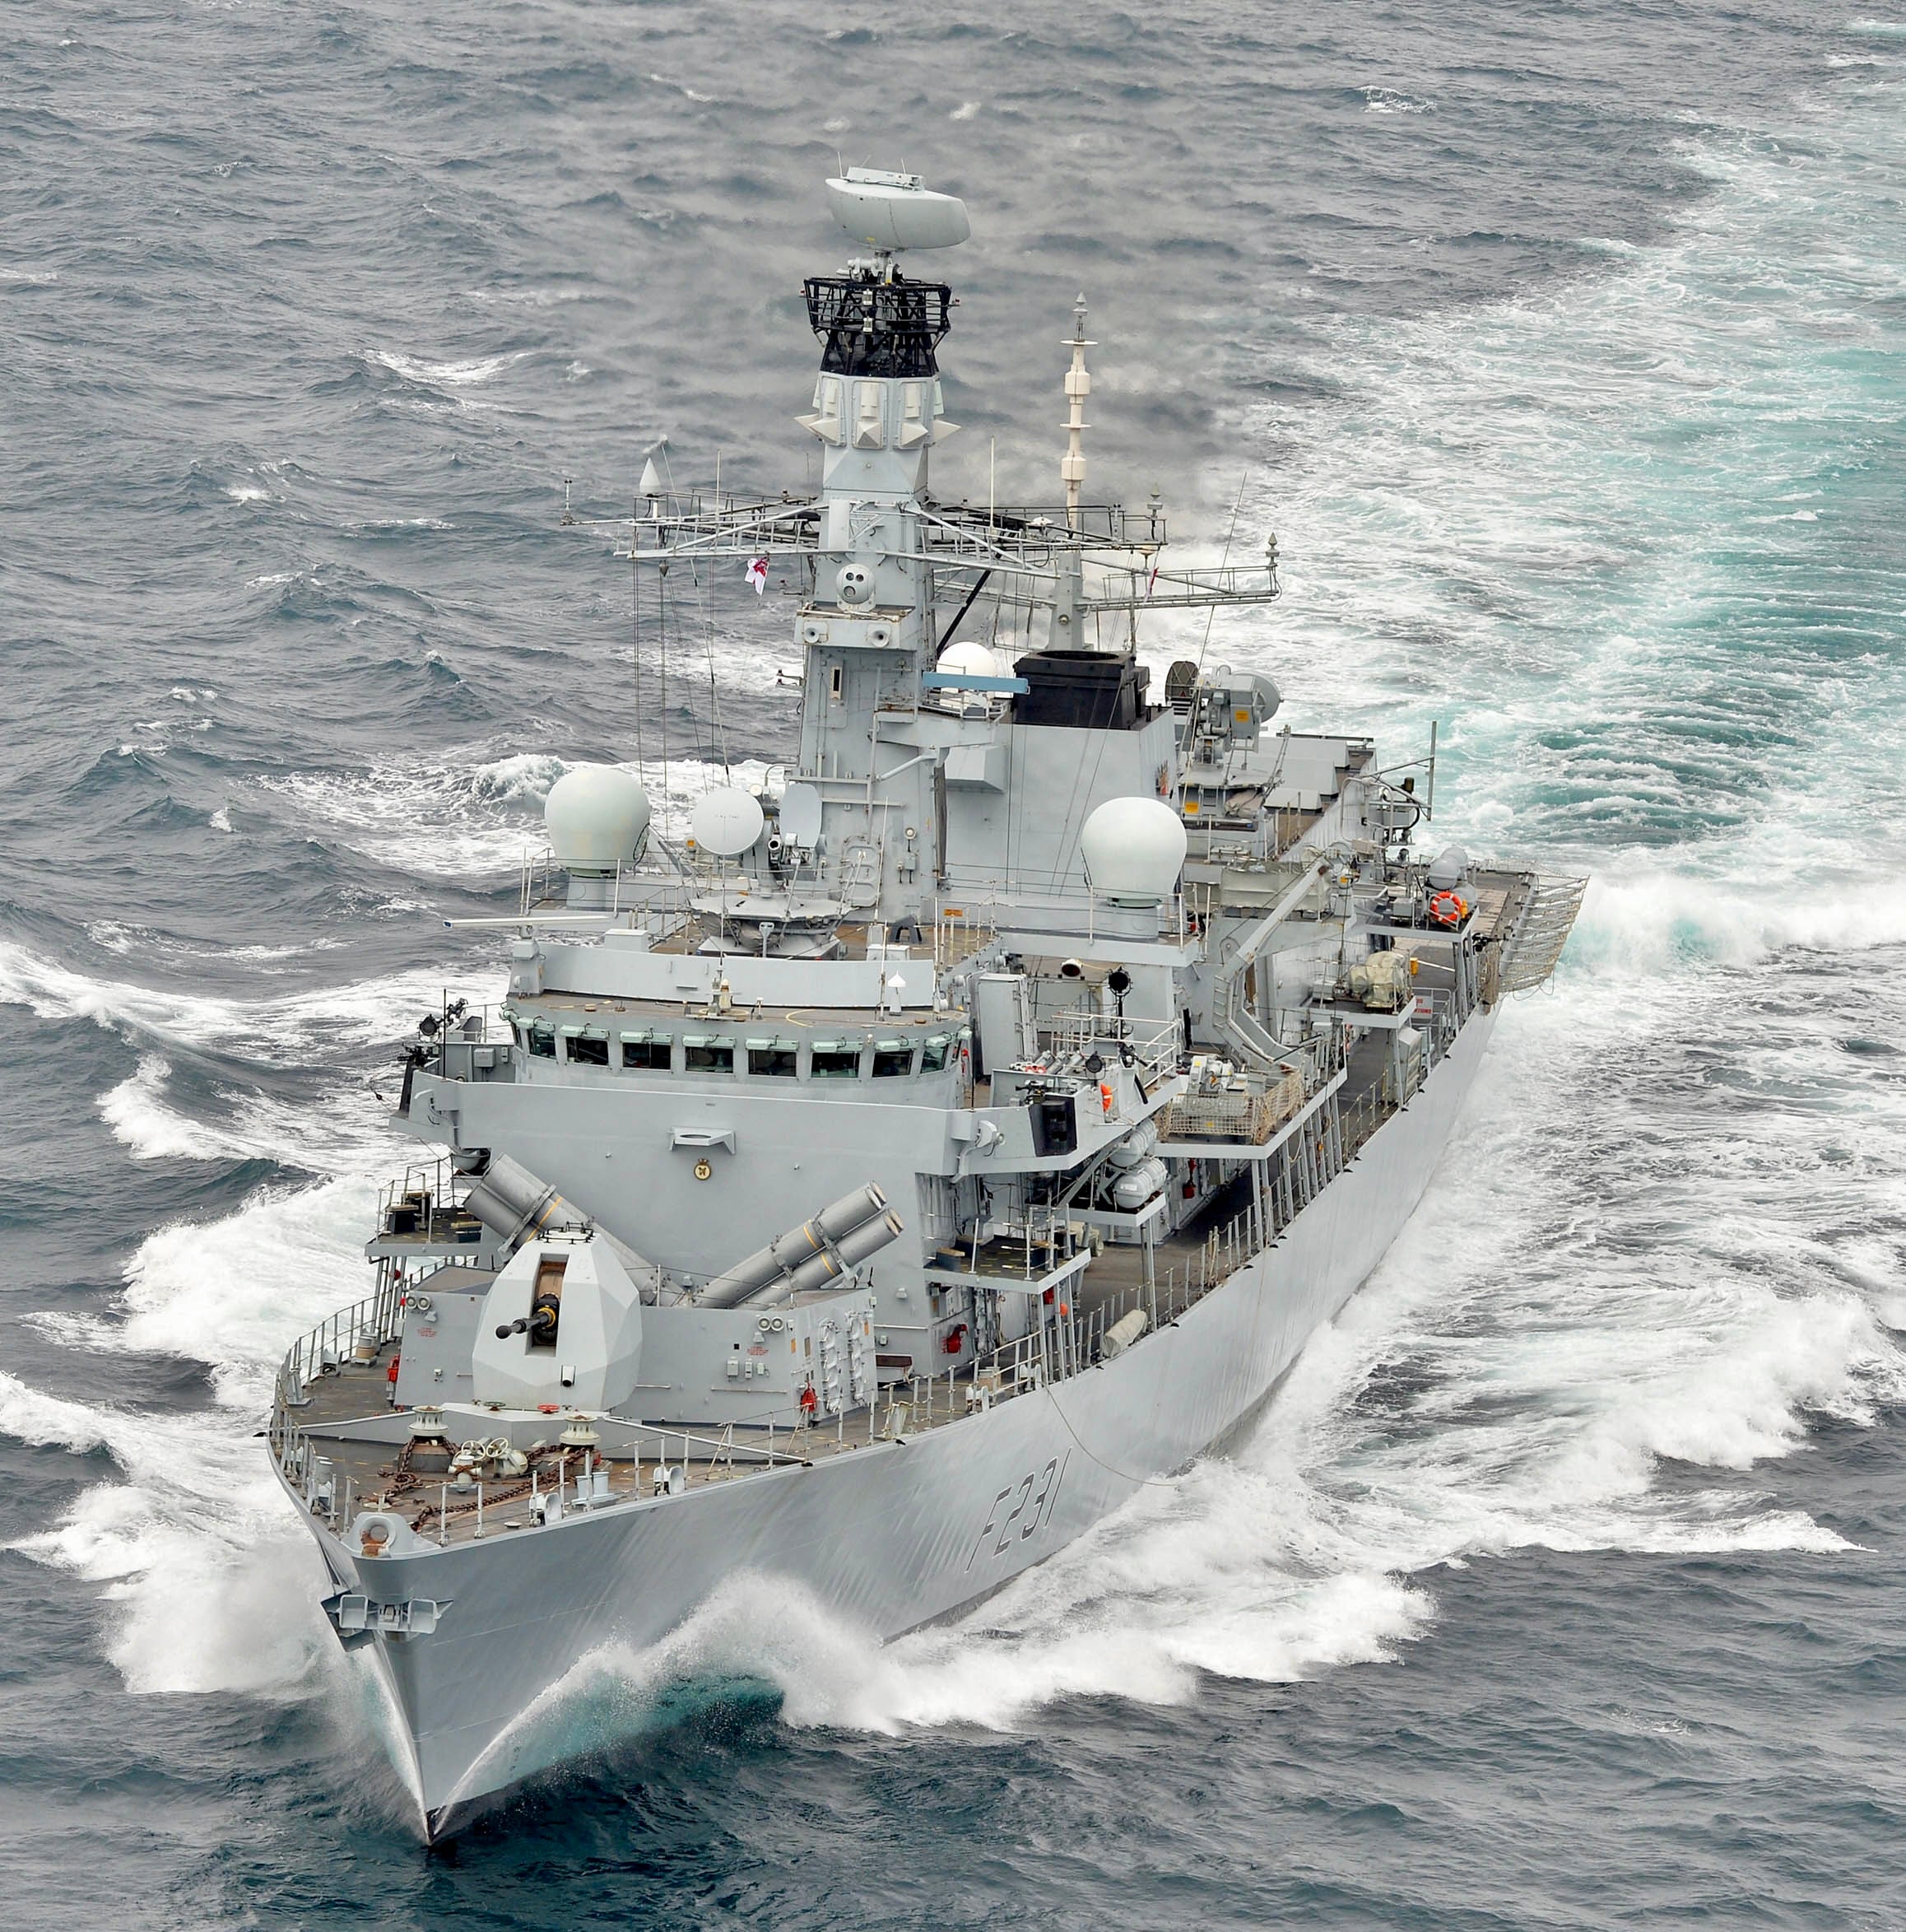 Royal Navy Type 23 frigate HMS Argyll patrolling in the Caribbean.

The warship dealt a third blow to smugglers in 2014 after seizing more than 850 kg of cocaine in a high speed midnight chase across the Caribbean.

It is the third drugs bust for HMS Argyll in as many months with this latest haul having a wholesale value of £36 million – in total she has now seized 1,600kg of cocaine with a combined value of more than £68 million.